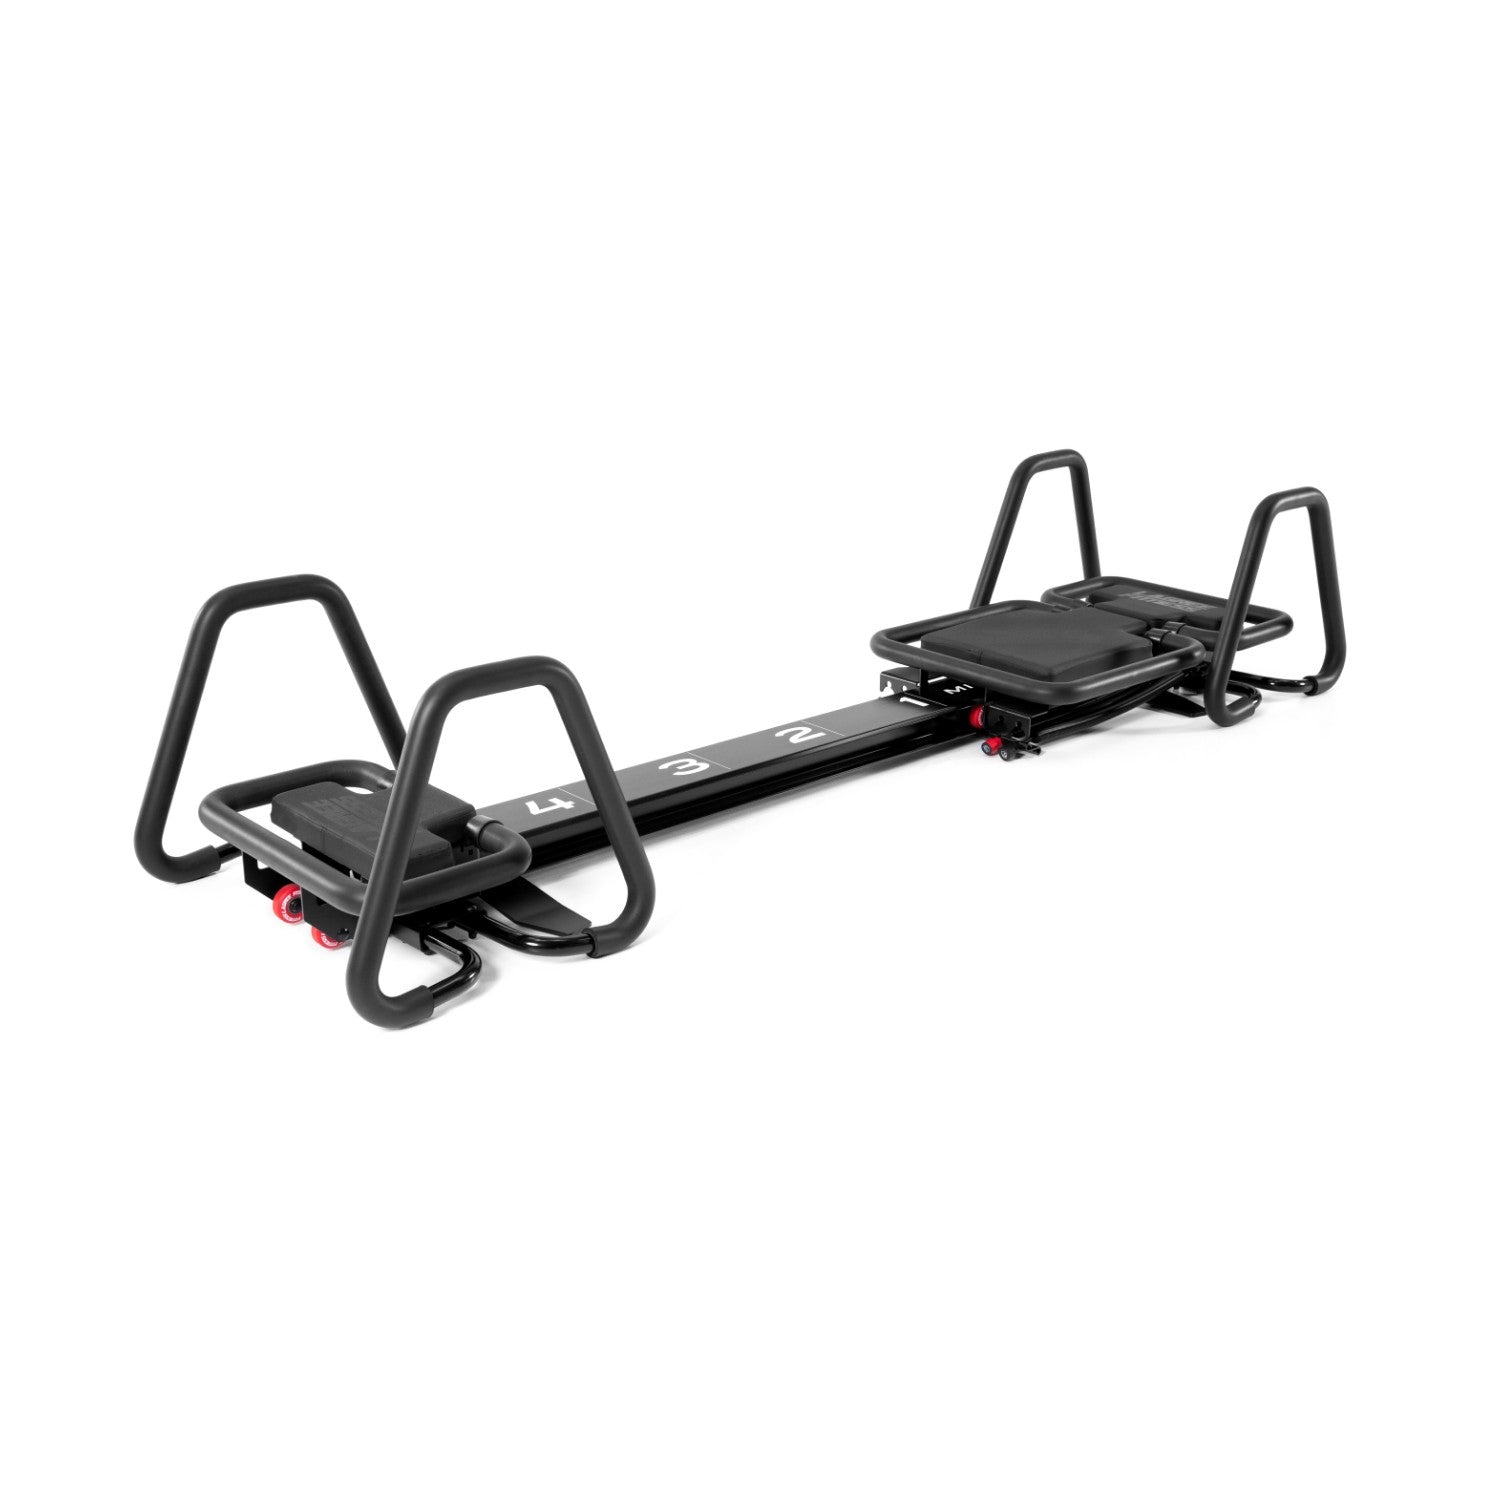 Lagree Micro Full Body all-in-one Exercise Equipment